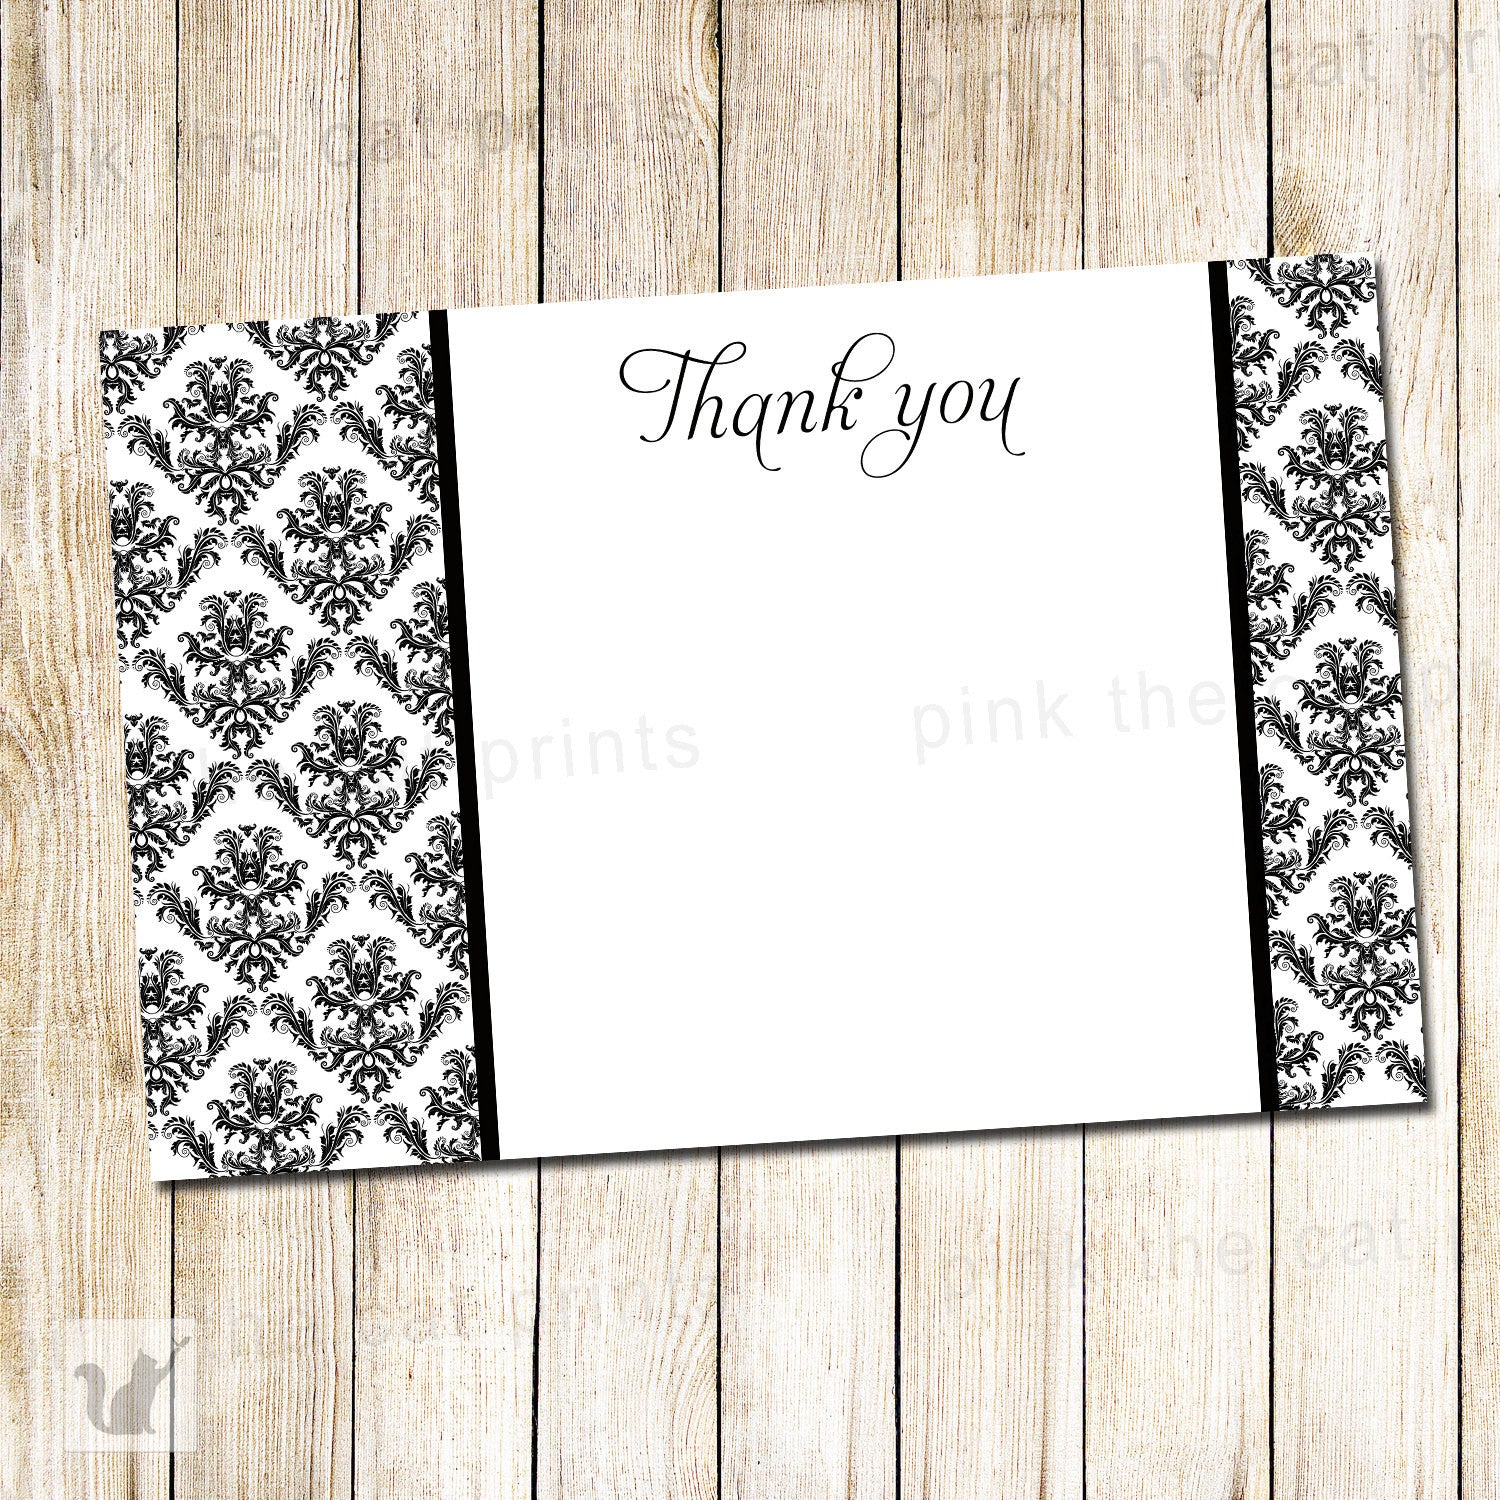 Printable Black White Damask Blank Thank You Card Note - Wedding Anniversary Birthday Adults Kids Bridal Baby Shower INSTANT DOWNLOAD